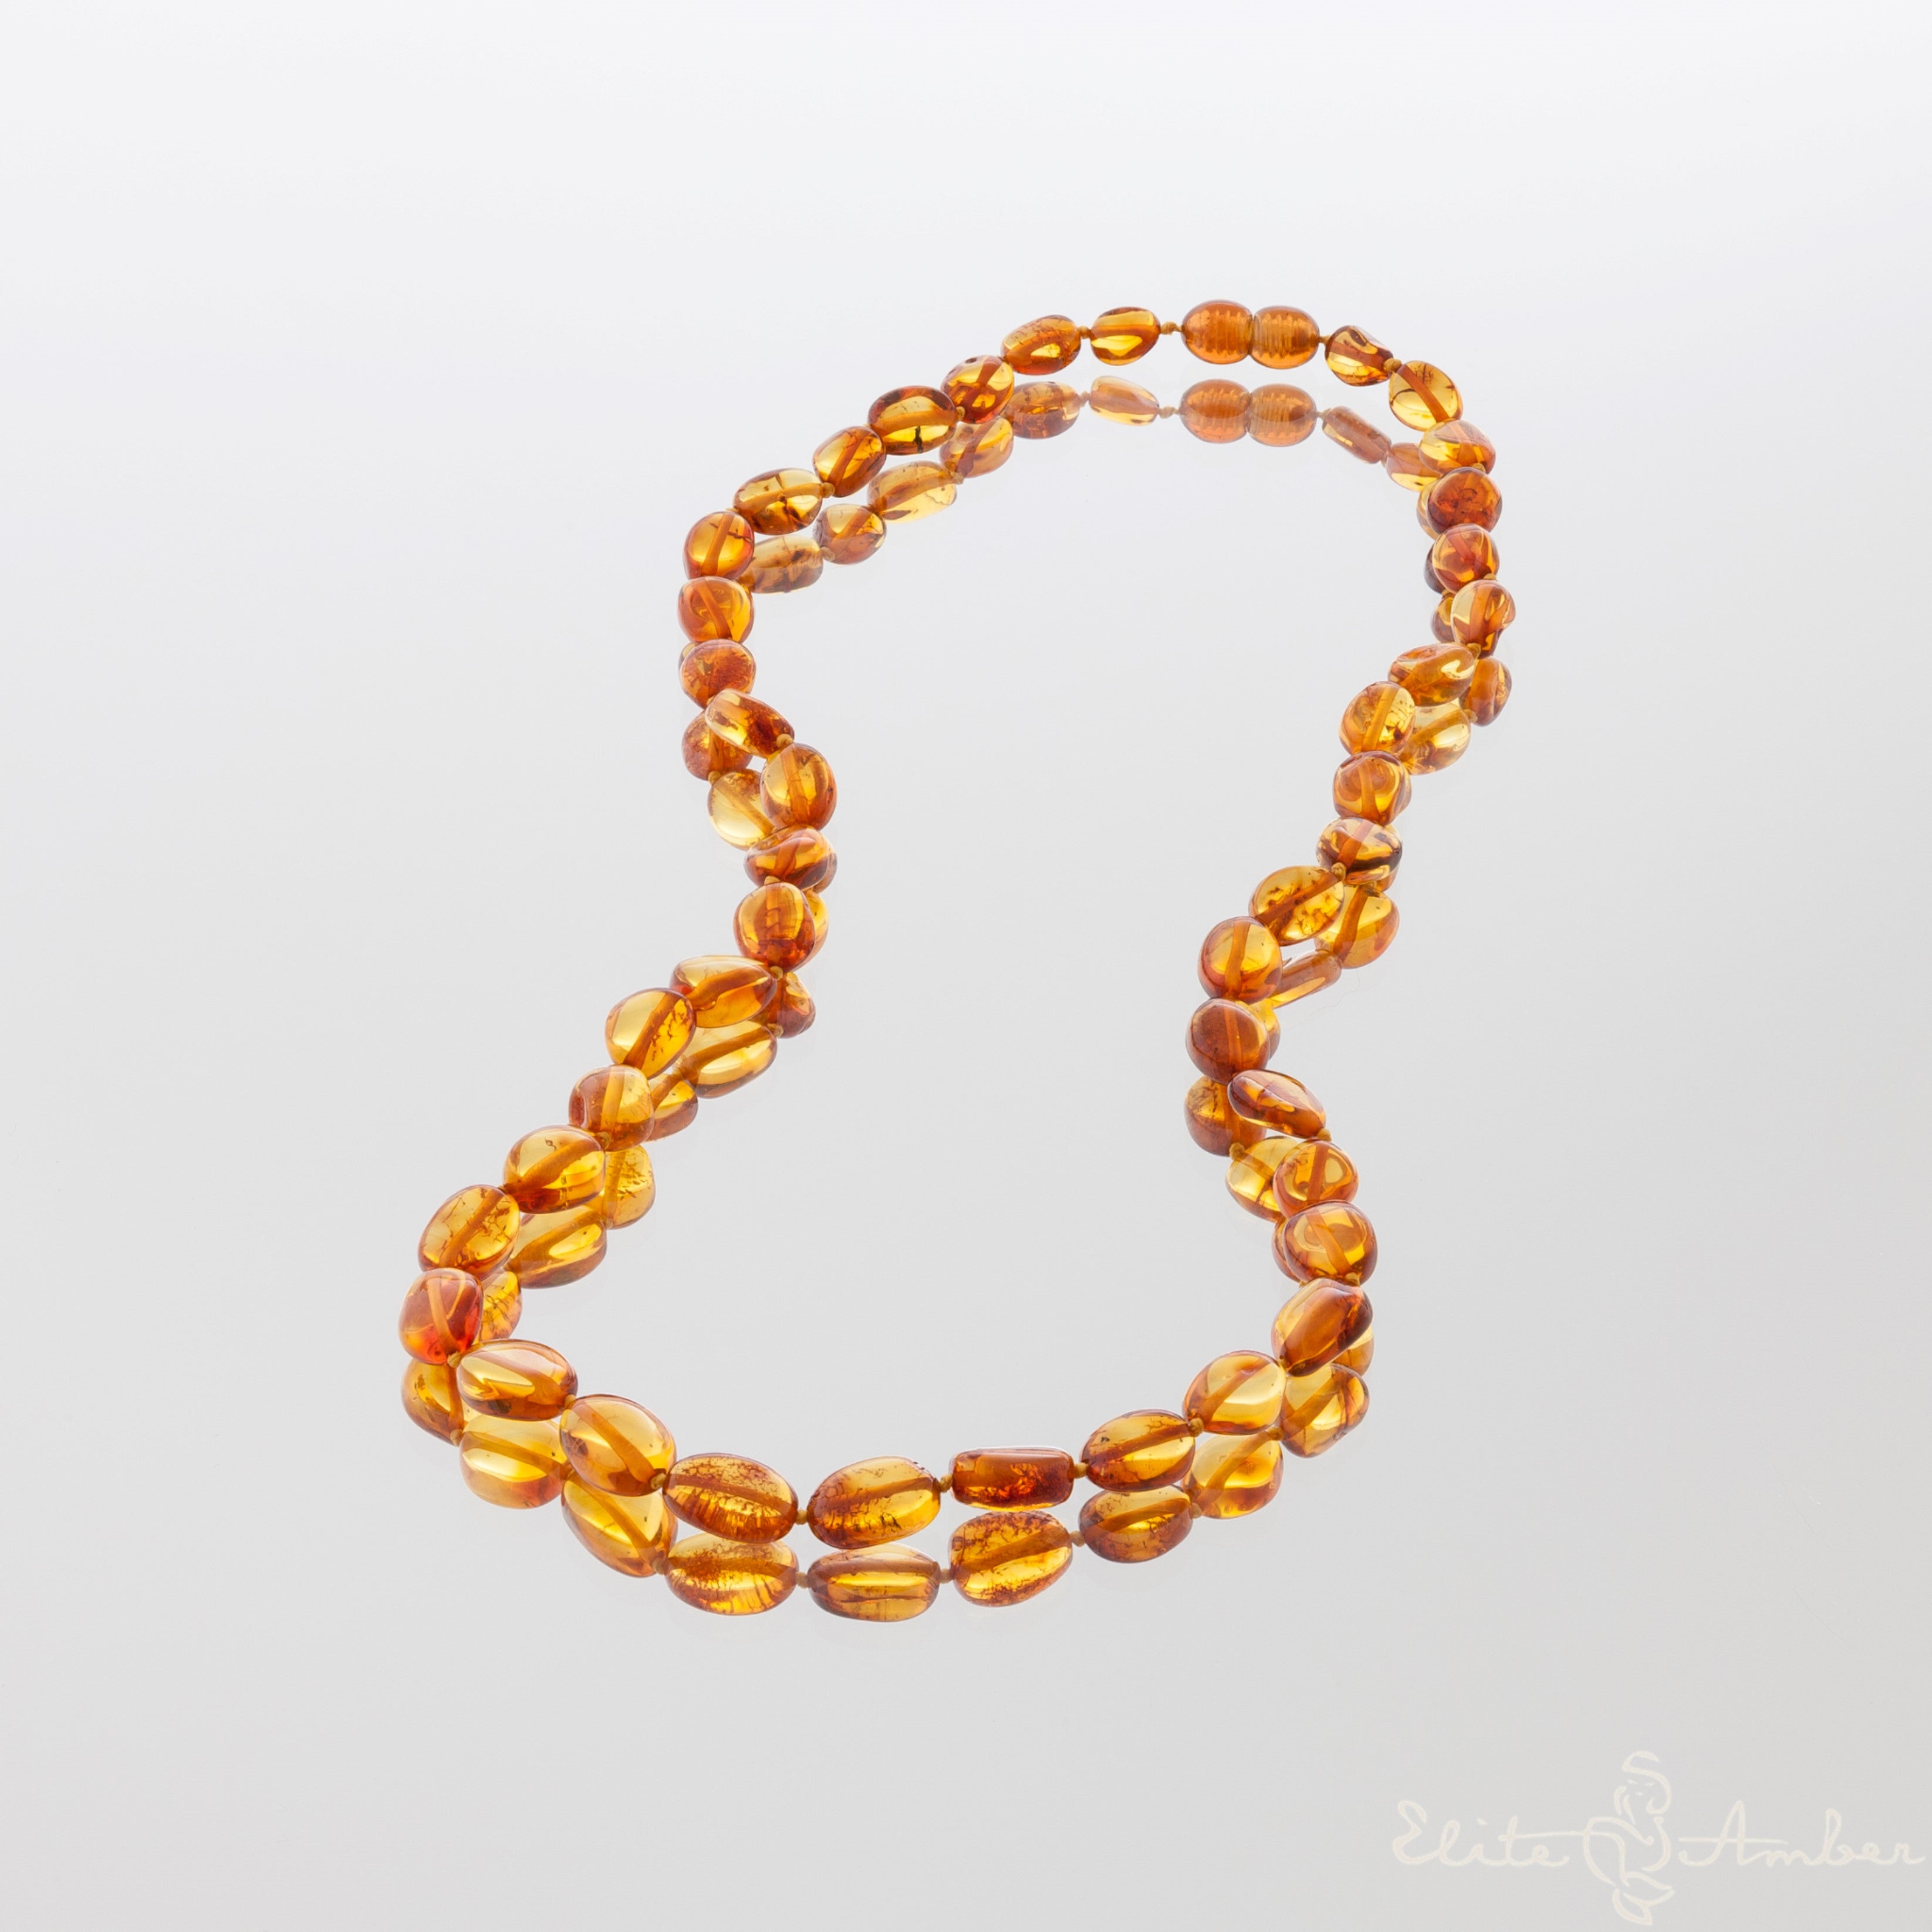 Amber necklace "Polished amber pebbles"